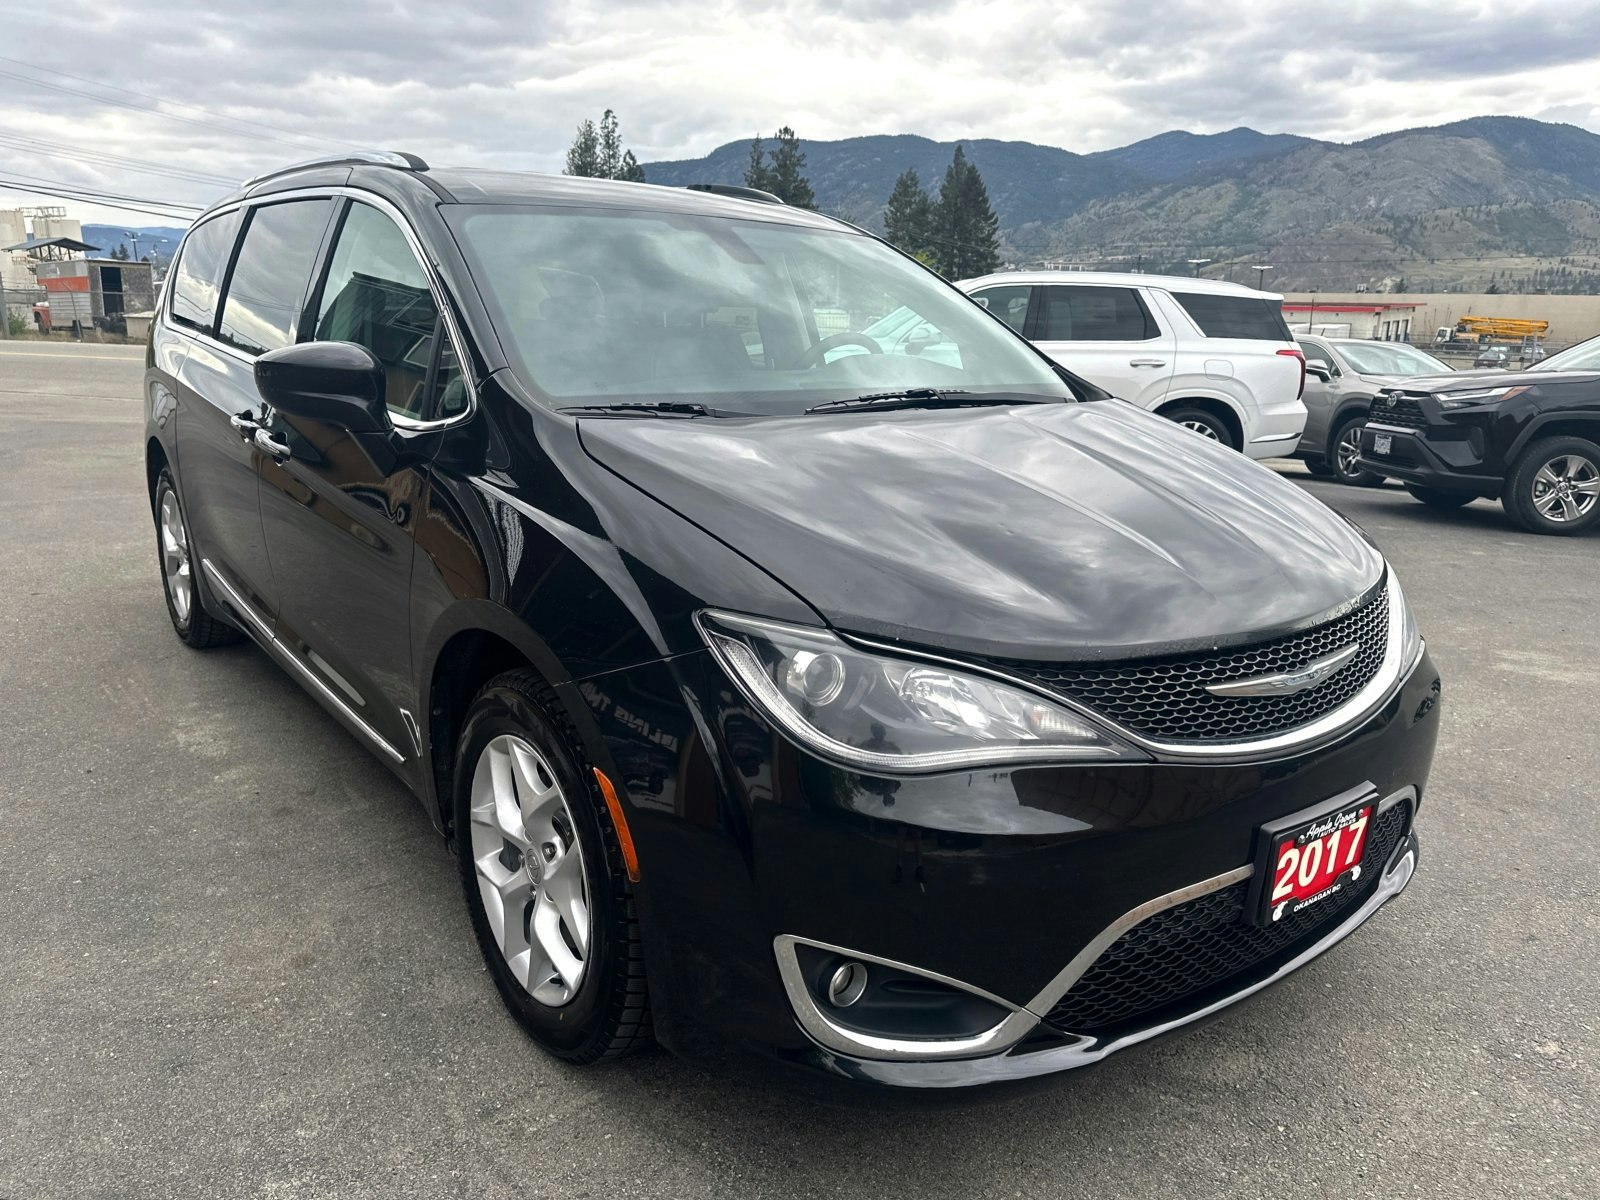 2017 Chrysler Pacifica Touring-L Plus (AG186) Main Image